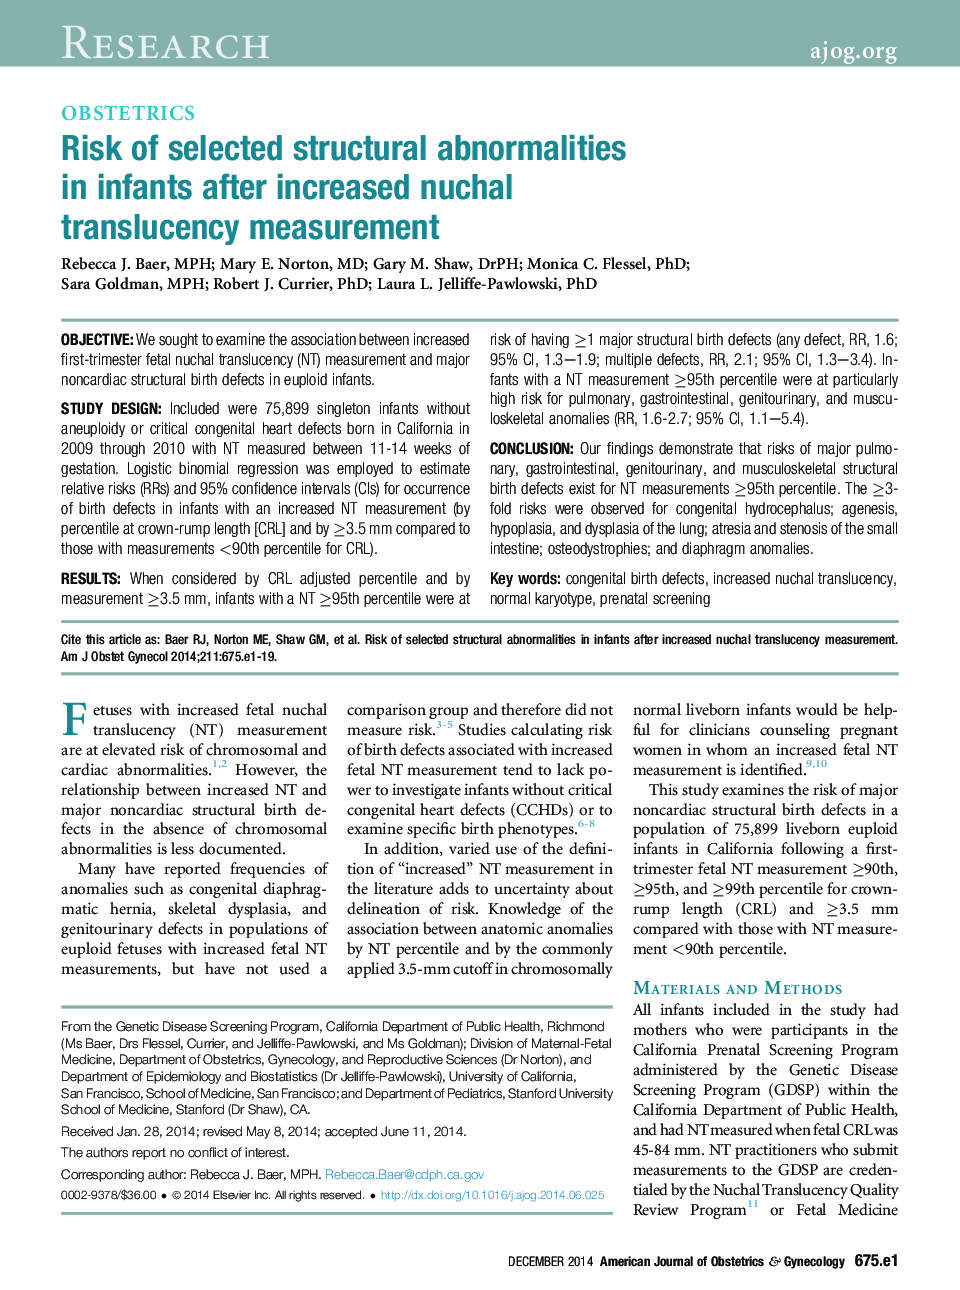 Risk of selected structural abnormalities in infants after increased nuchal translucency measurement